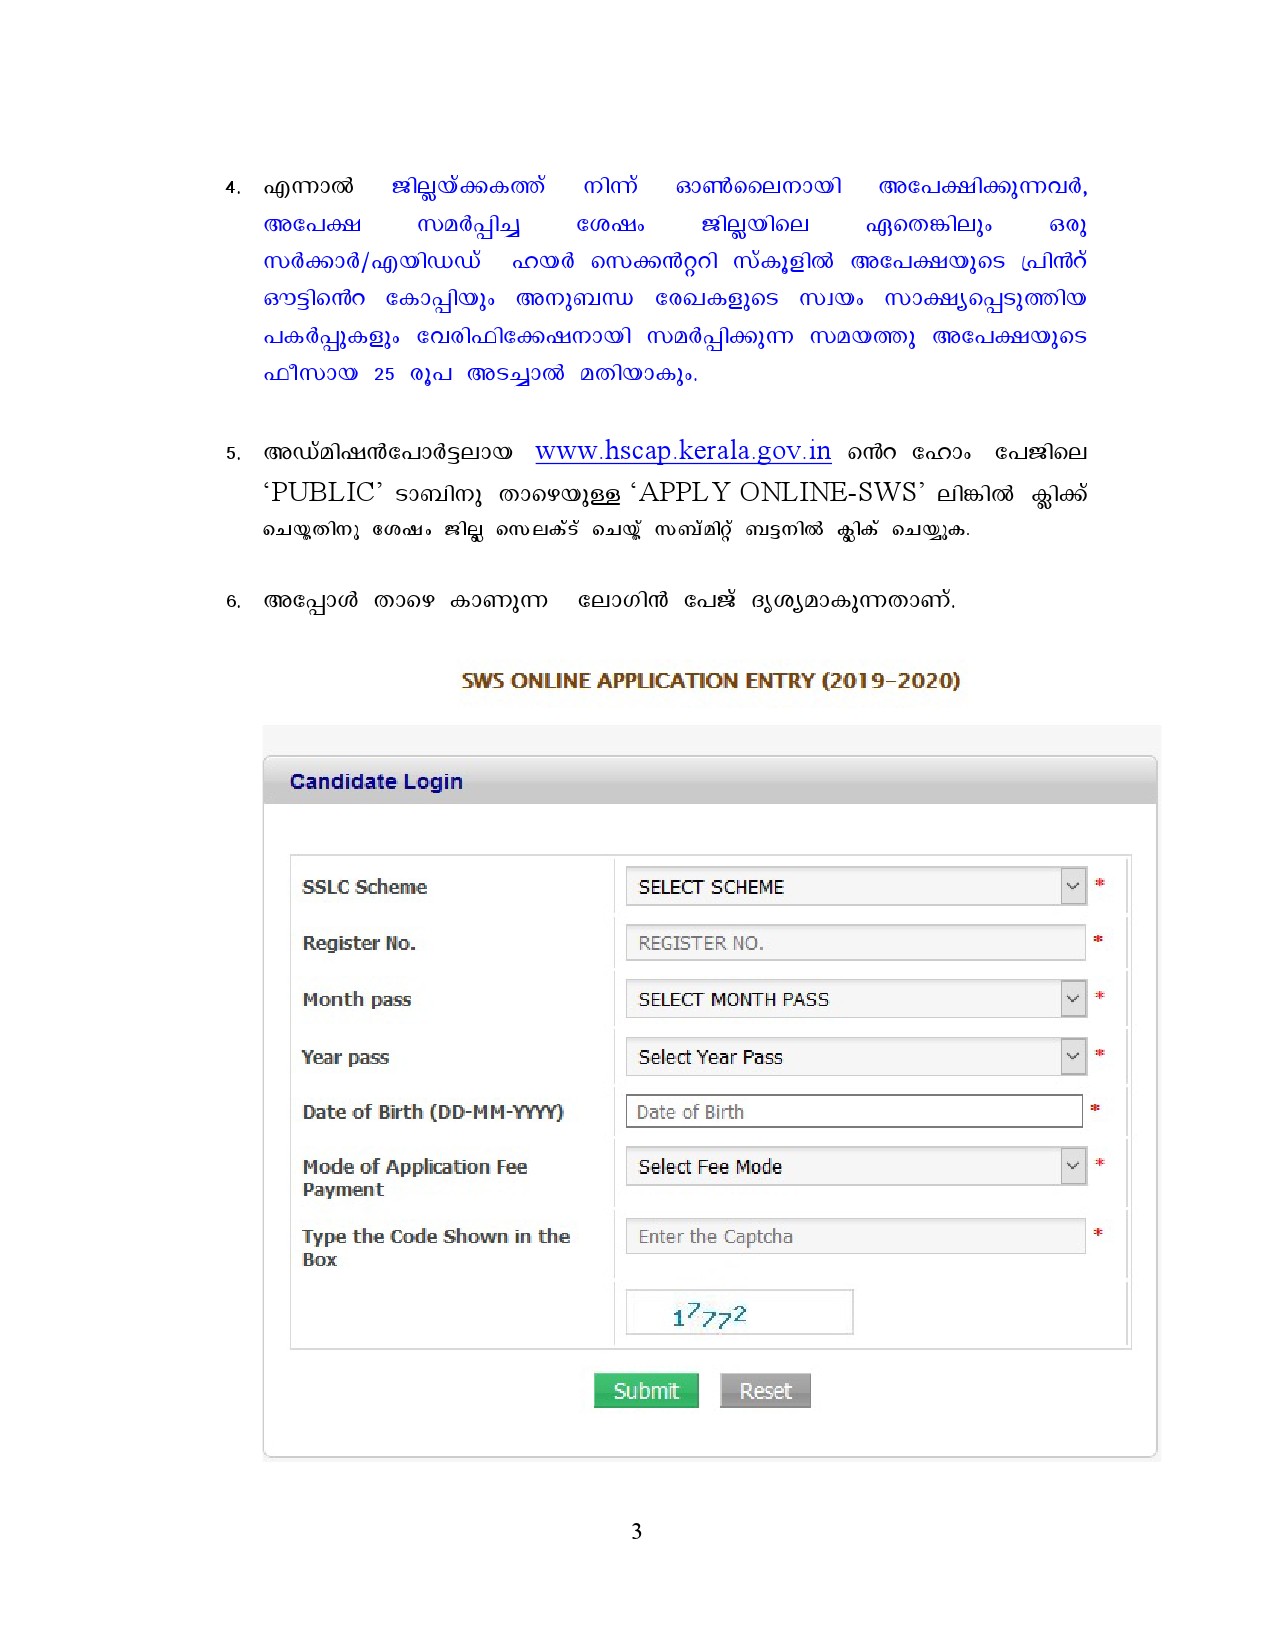 Higher Secondary School Online Application Manual in Malayalam - Notification Image 3